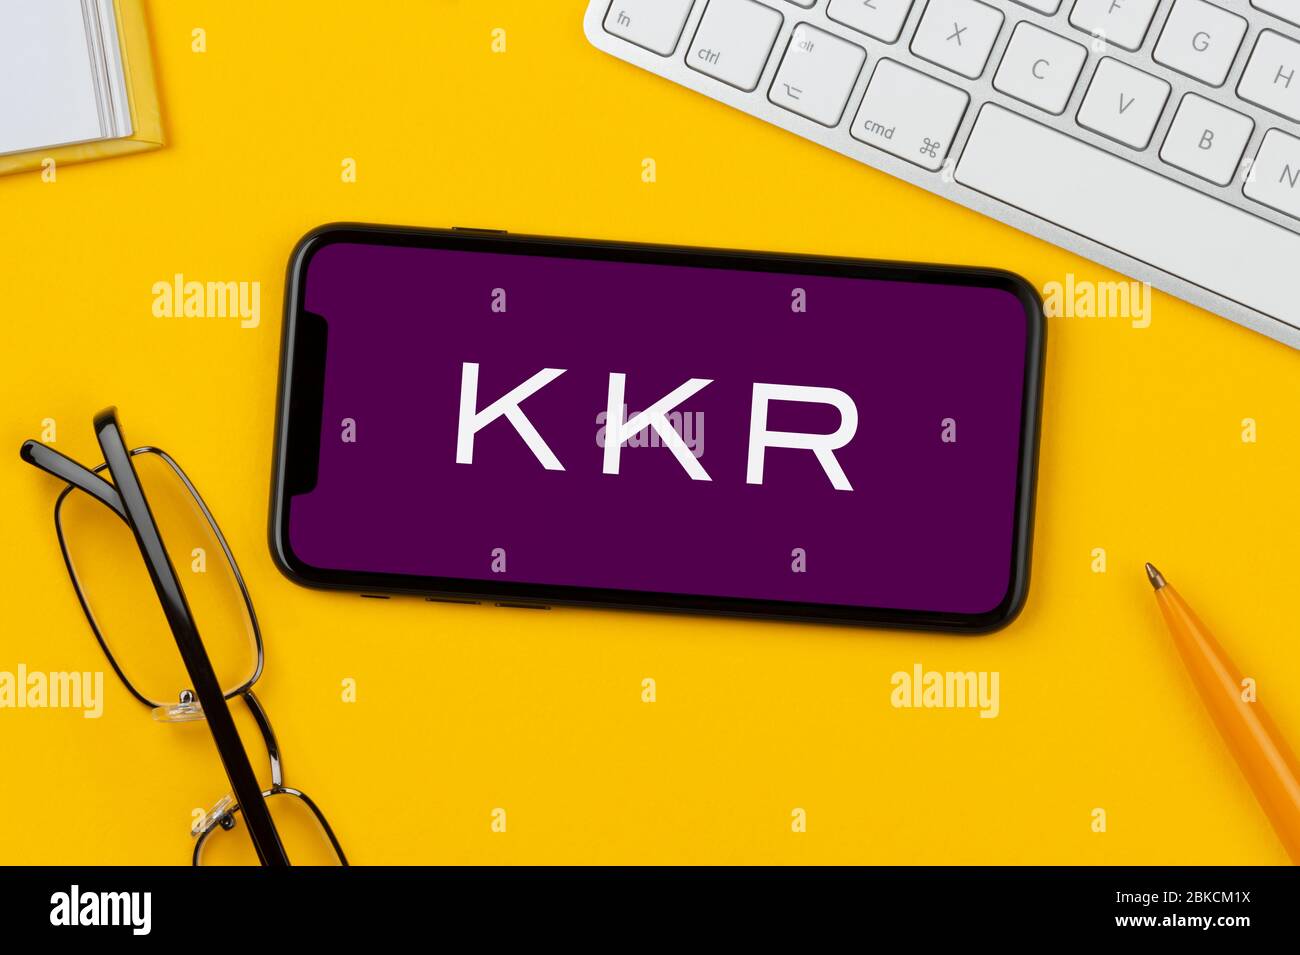 A smartphone showing the KKR logo rests on a yellow background along with a keyboard, glasses, pen and book (Editorial use only). Stock Photo